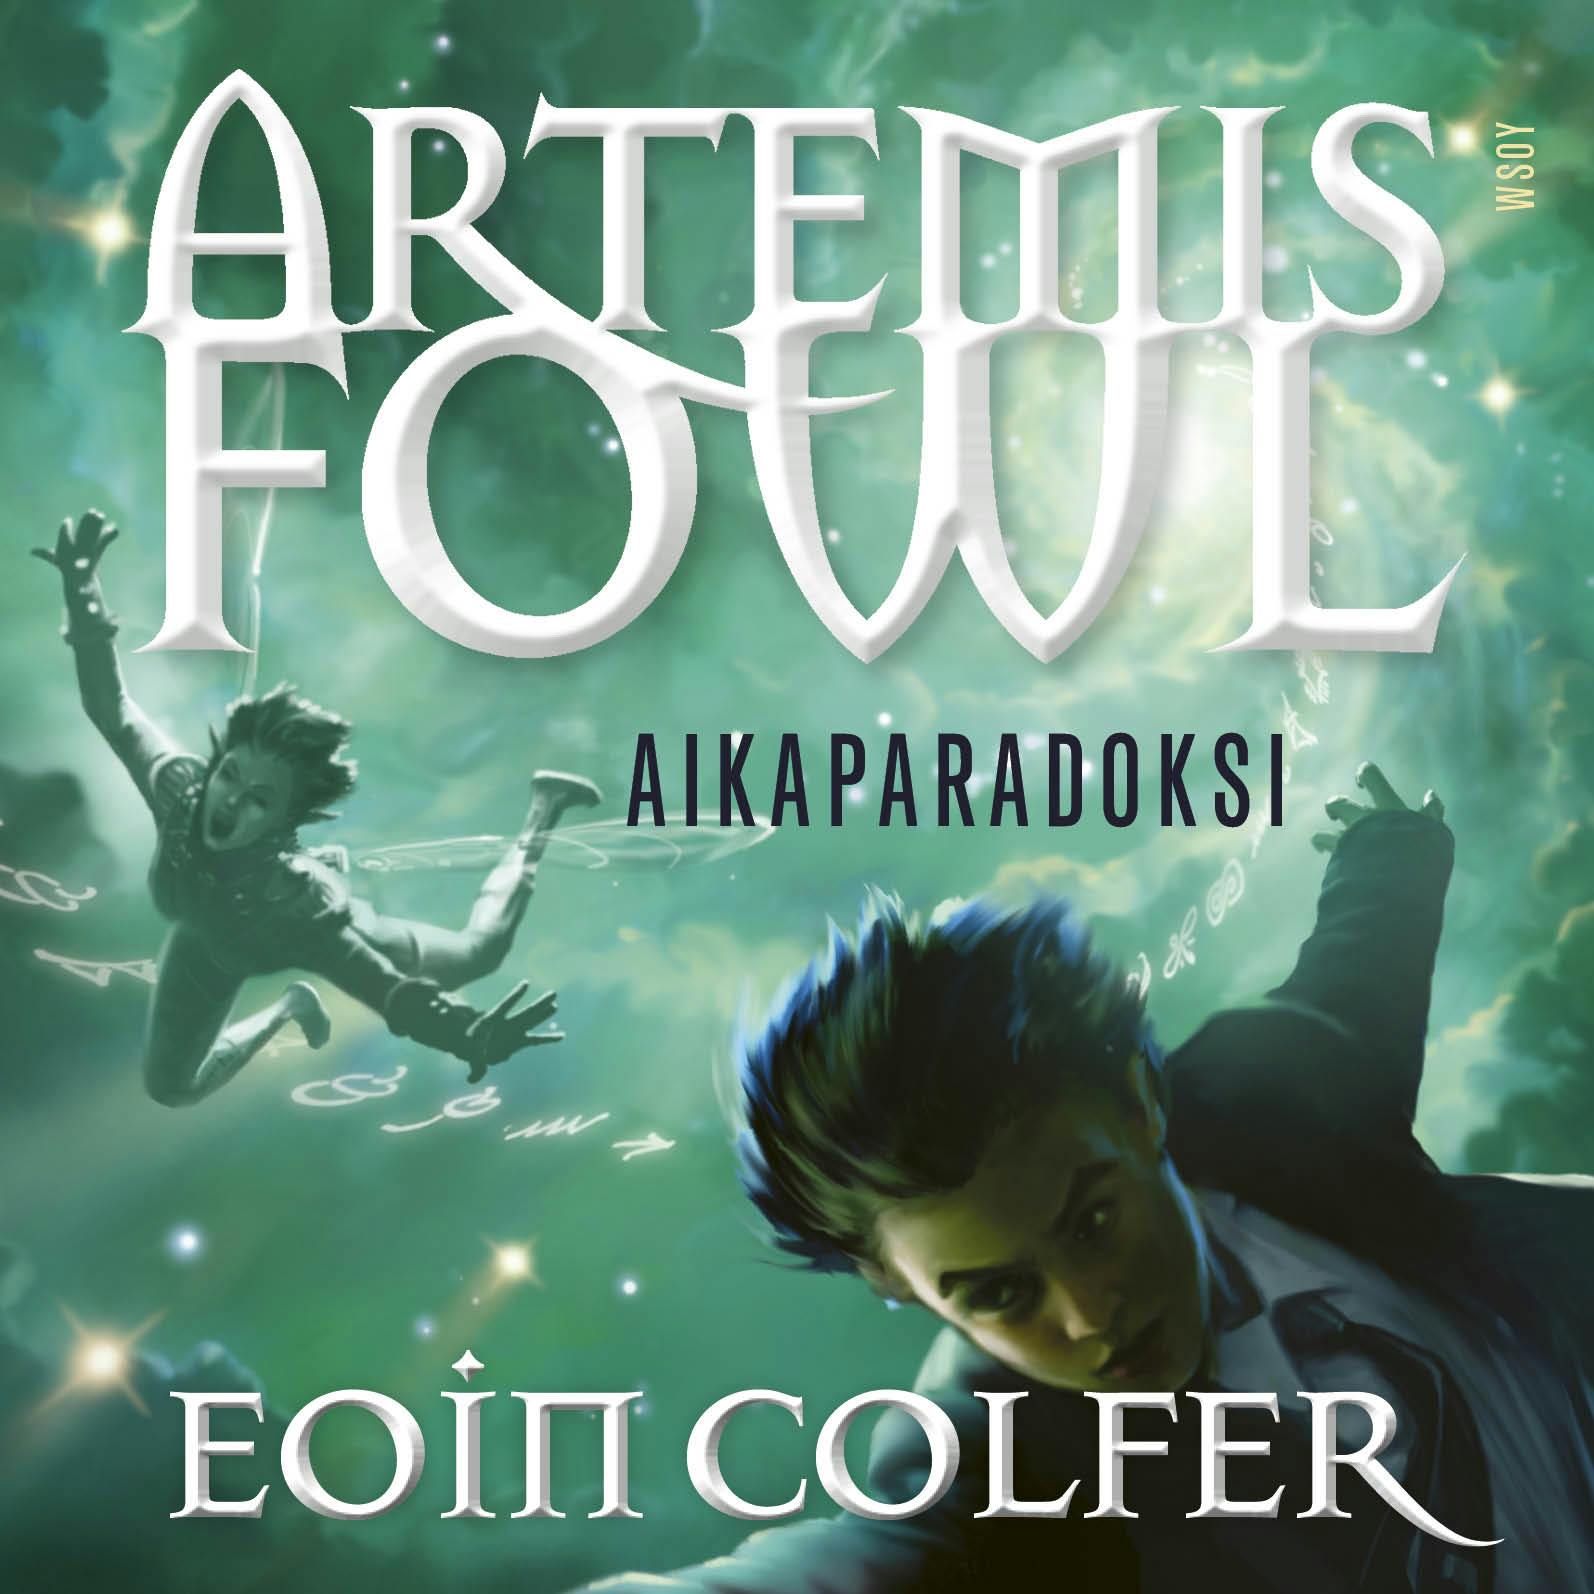 The Time Paradox: Artemis Fowl (Book 6)